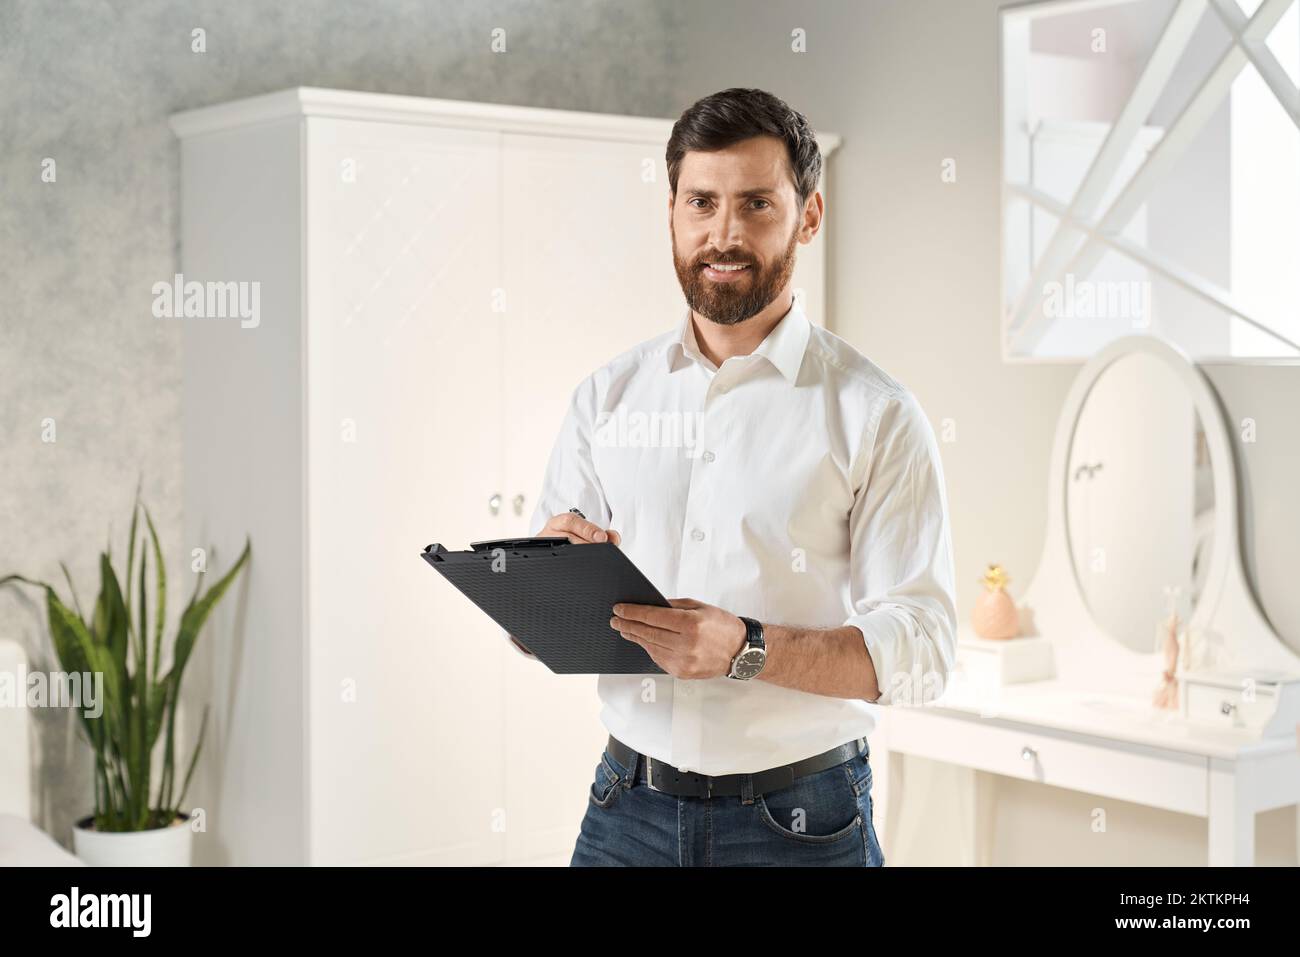 Professional retailer standing with clip-on tablet, while smiling at camera in exhibition center. Portrait of elegant male expert working, with bedroo Stock Photo